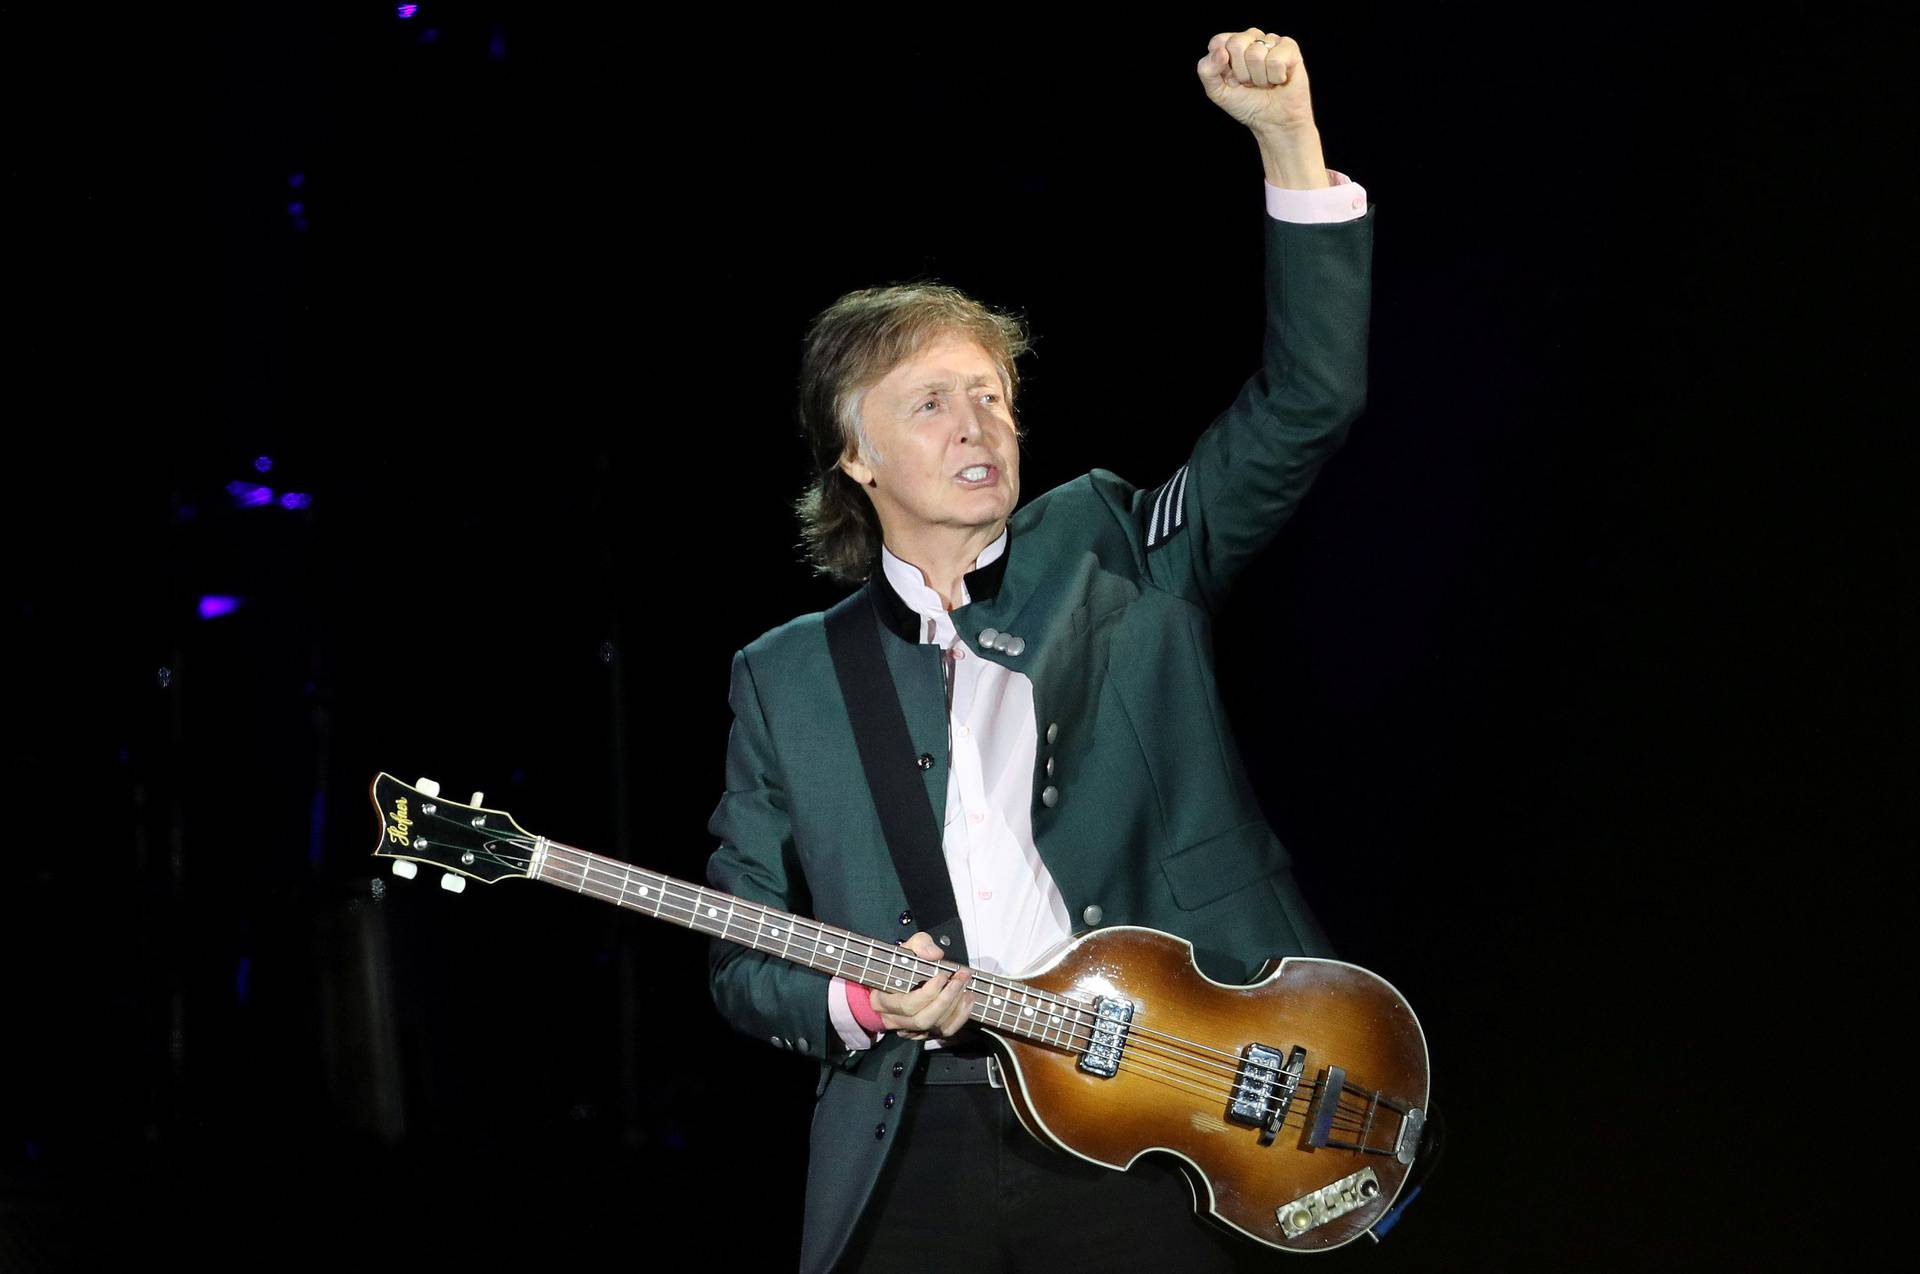 FILE PHOTO: Paul McCartney performs during the "One on One" tour concert in Porto Alegre